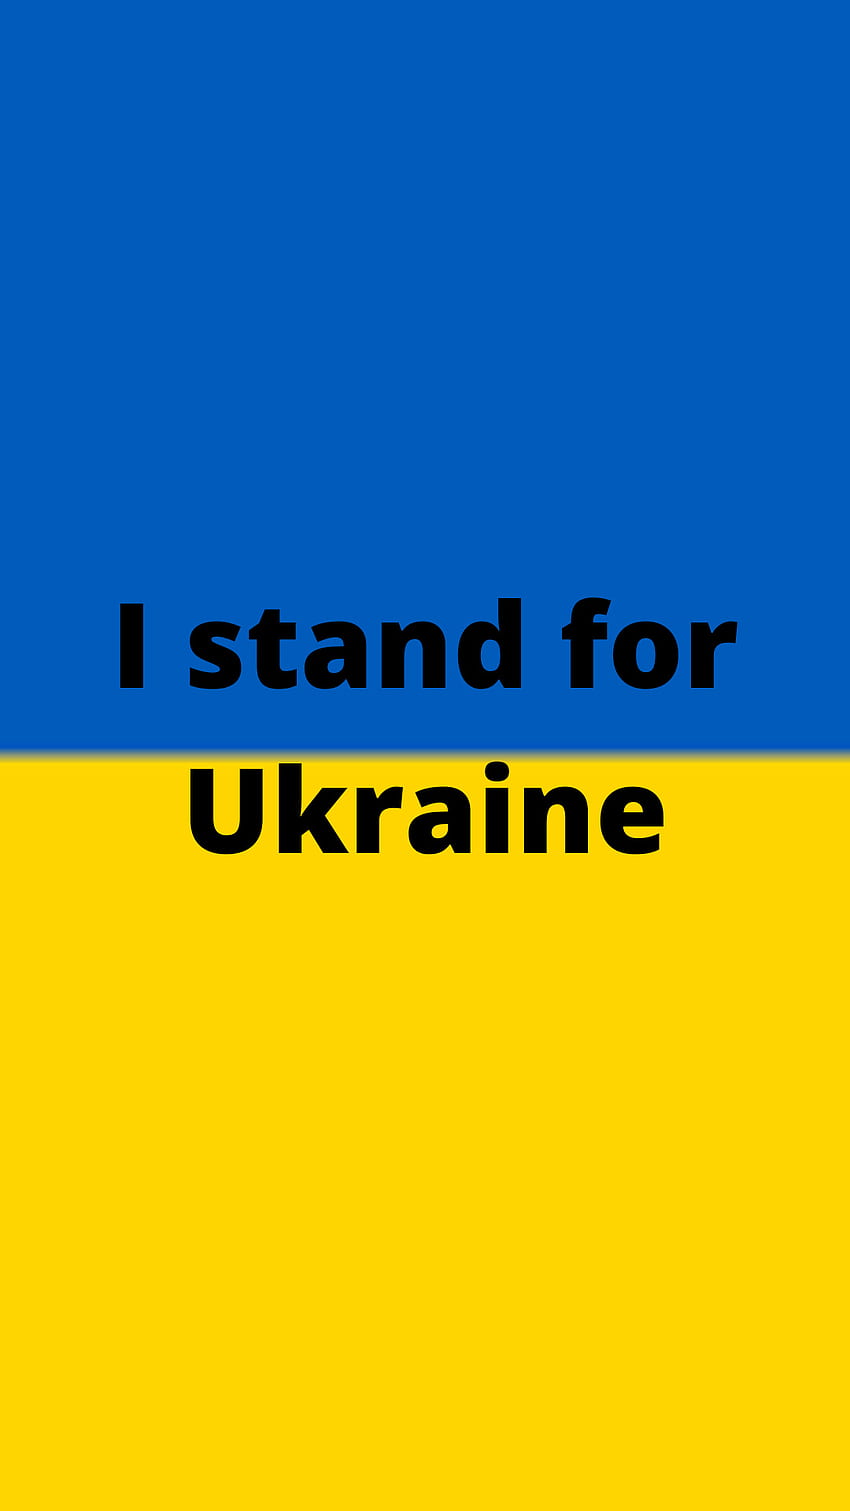 I stand for Ukraine, blue, yellow HD phone wallpaper